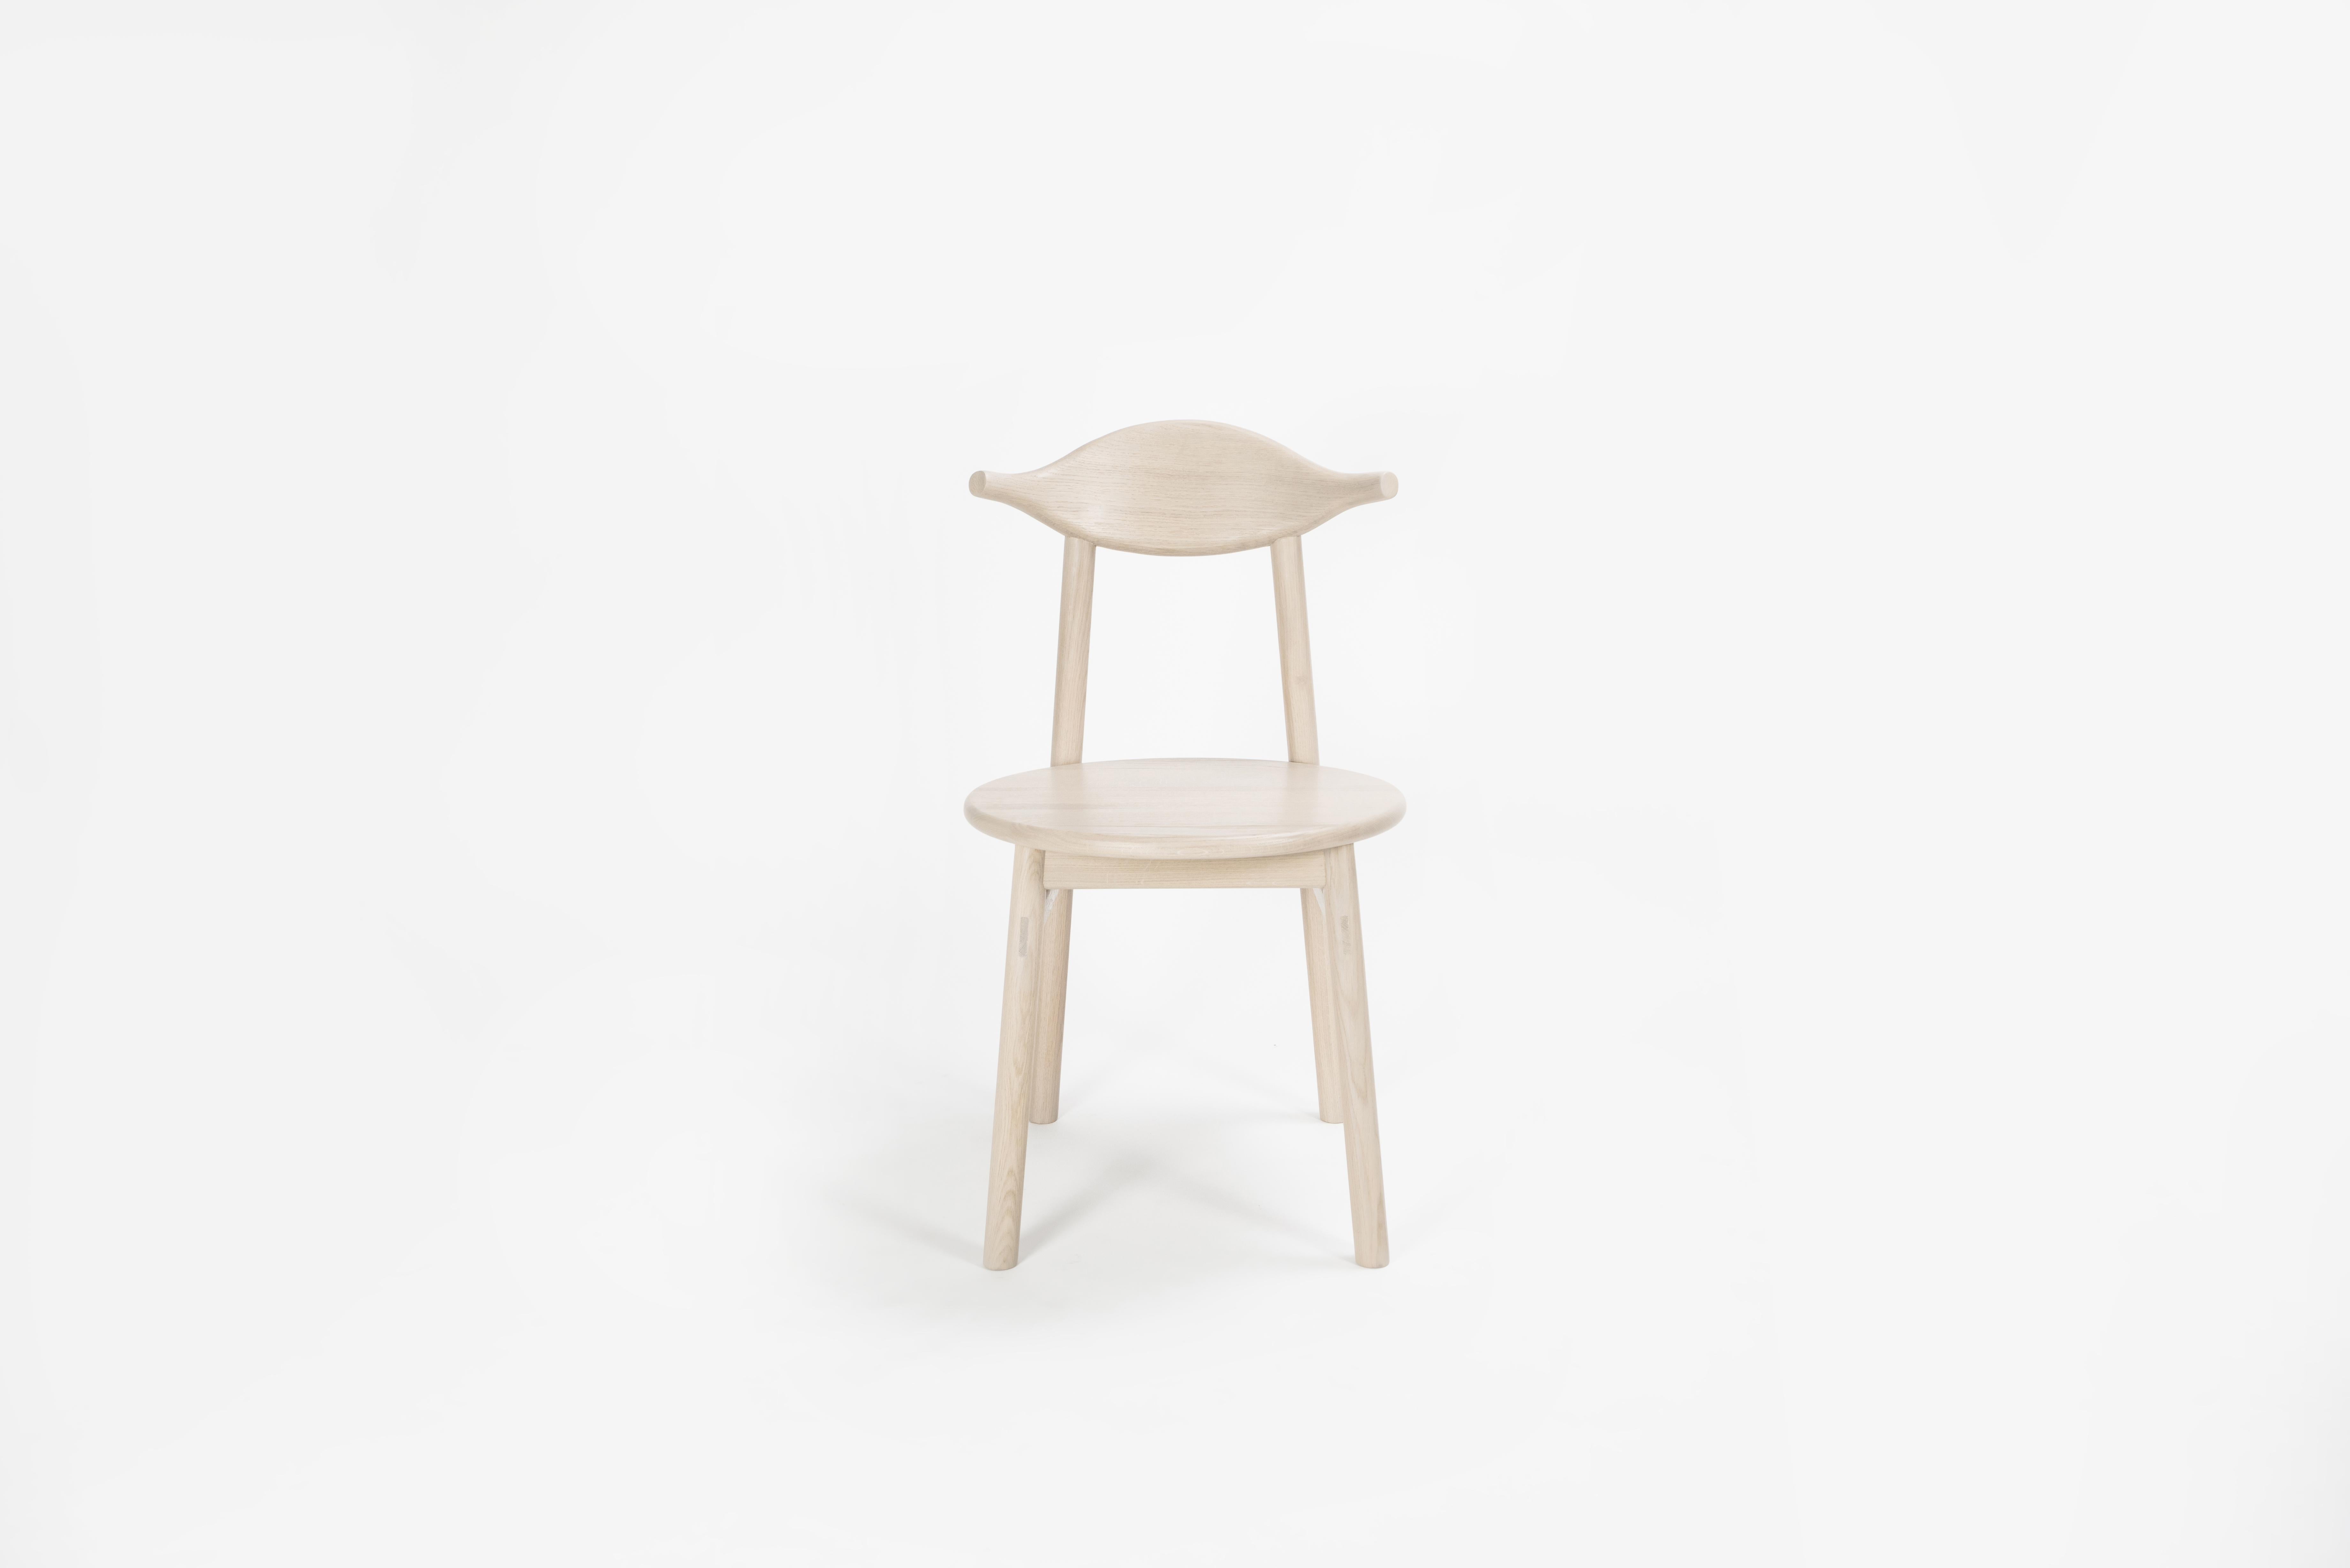 Sun at Six is a contemporary furniture design studio that works with traditional Chinese joinery masters to handcraft our pieces using traditional joinery. The Ember chair is a versatile seat made using traditional joinery techniques. The wide,